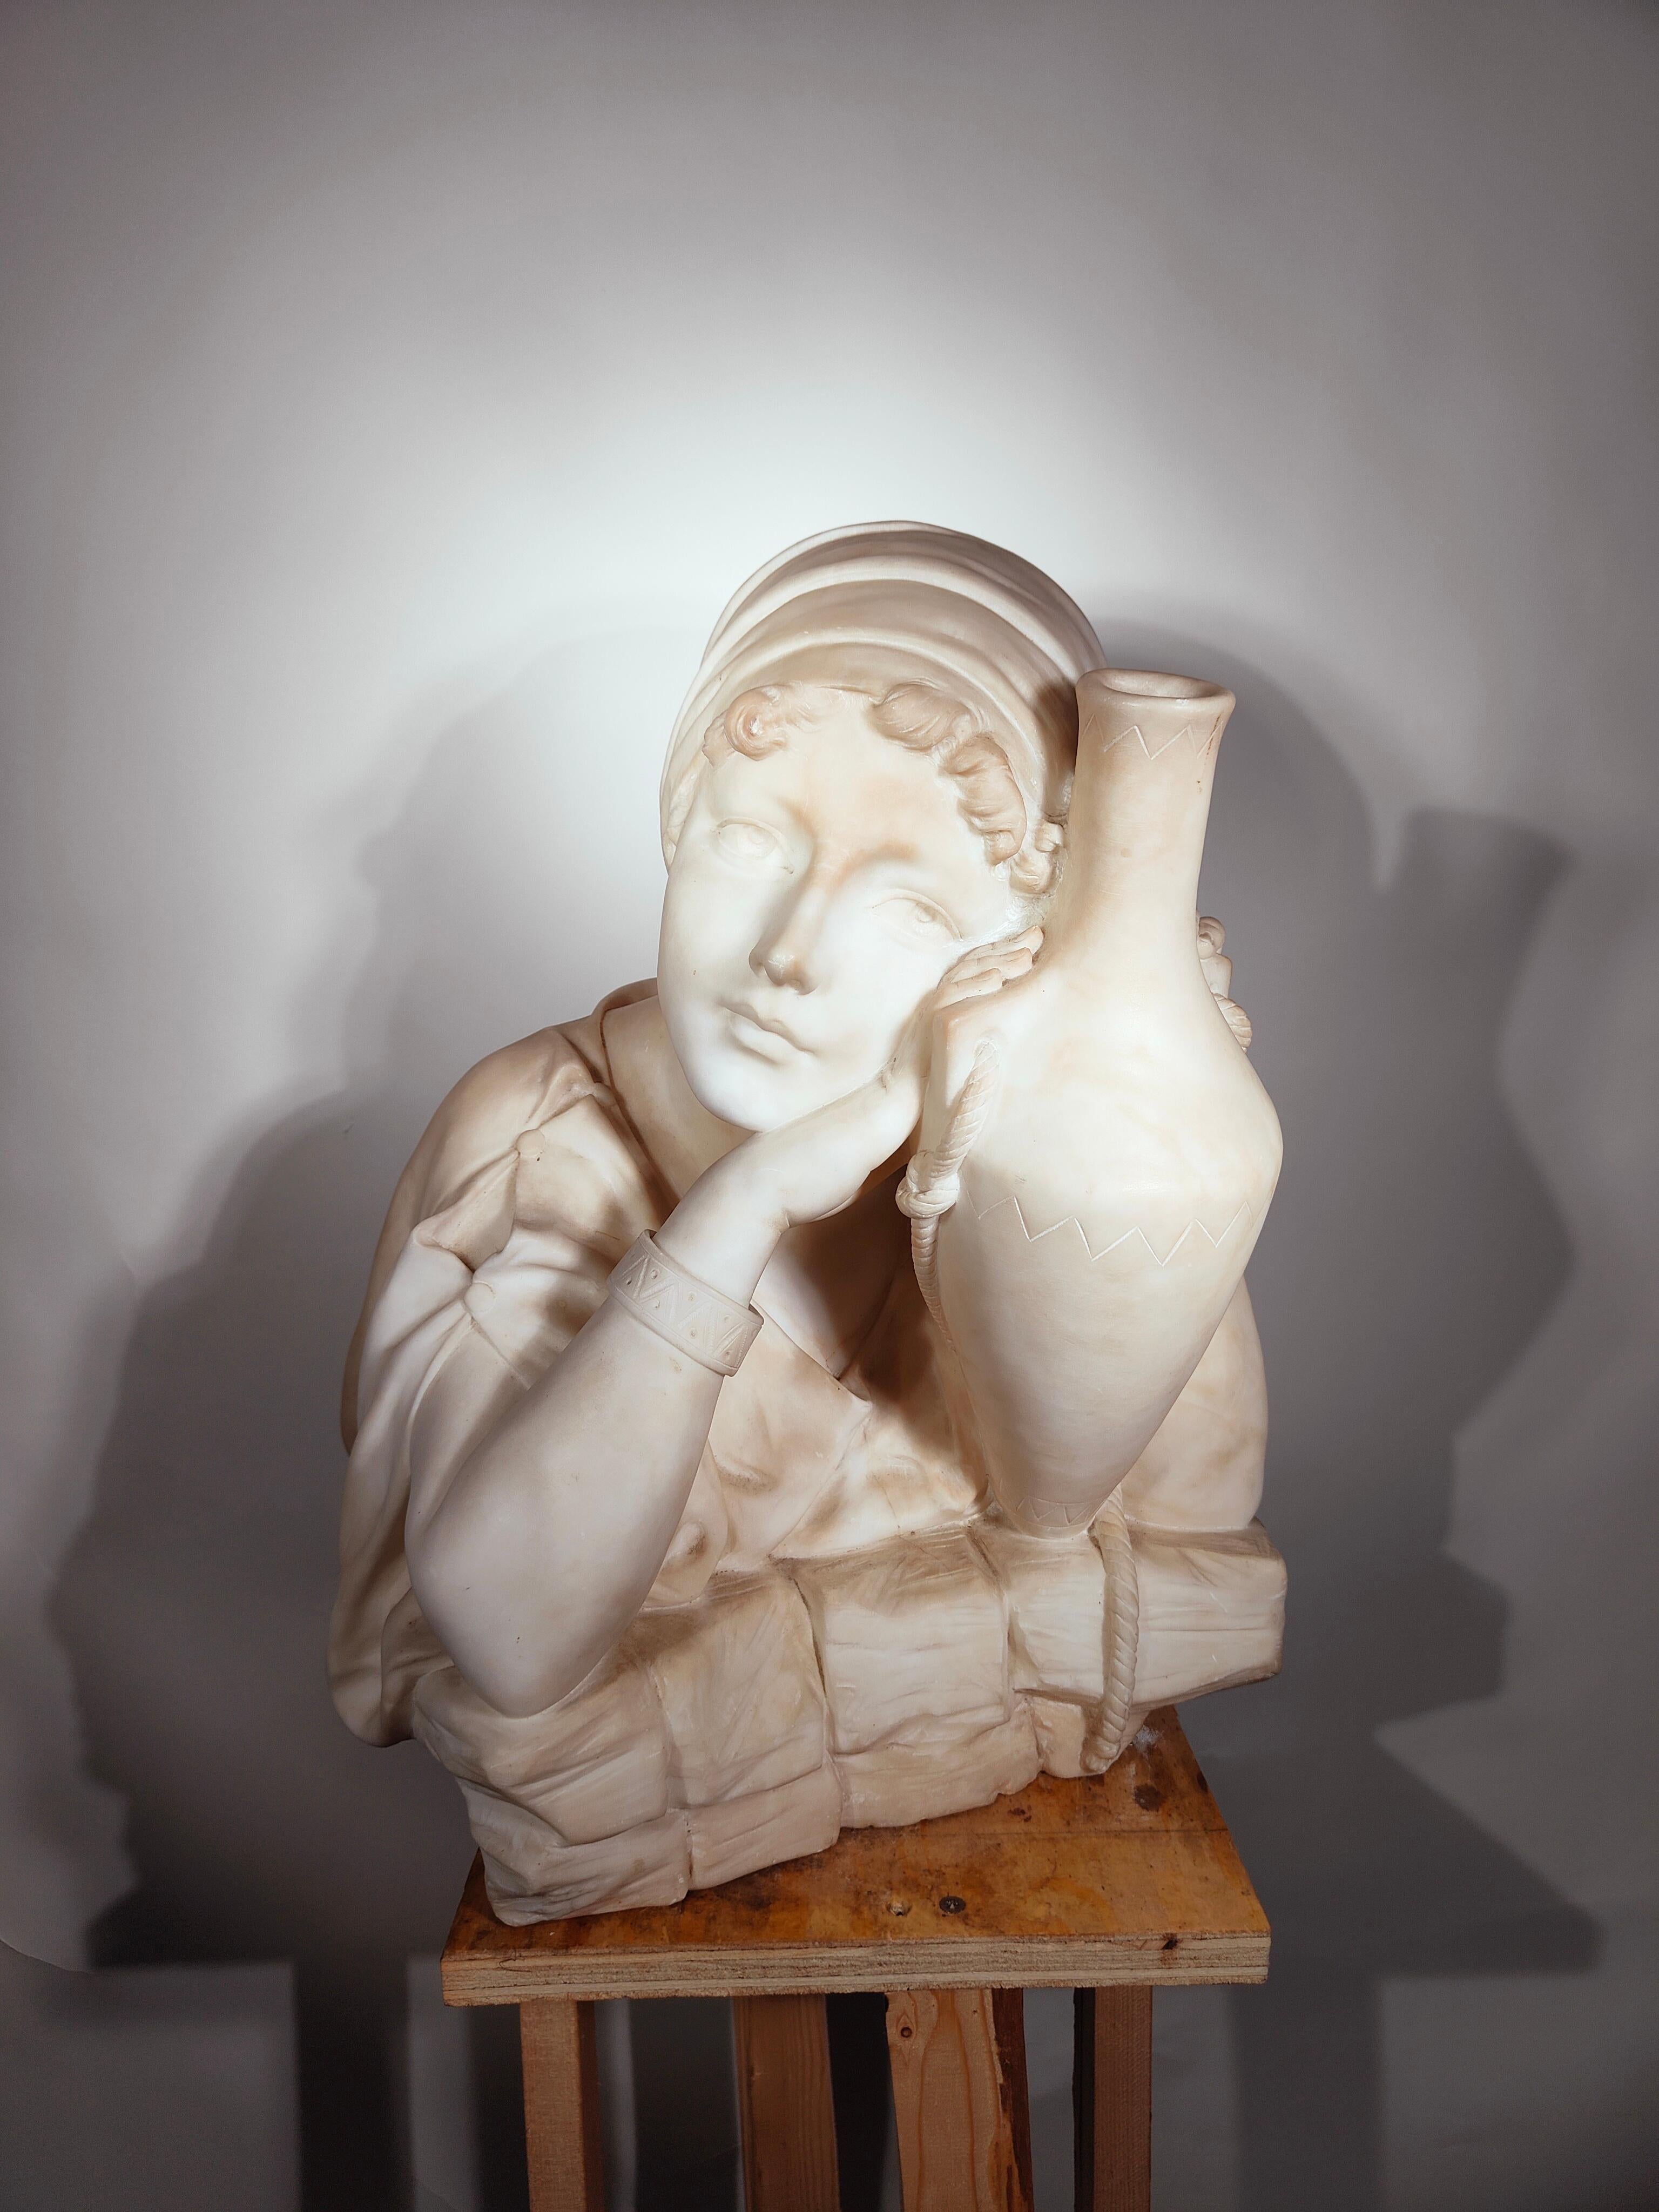 XIX Century Italian Marble Sculpture
ELEGANT 19TH CENTURY ITALIAN MARBLE SCULPTURE REPRESENTING A YOUNG MAN WITH A PITCHER. TO HIGHLIGHT THE YOUNG MAN'S RELAXED EXPRESSION AND THE EXCELLENT EXECUTION OF THIS SCULPTURE. IT HAS ITS ORIGINAL PATINA